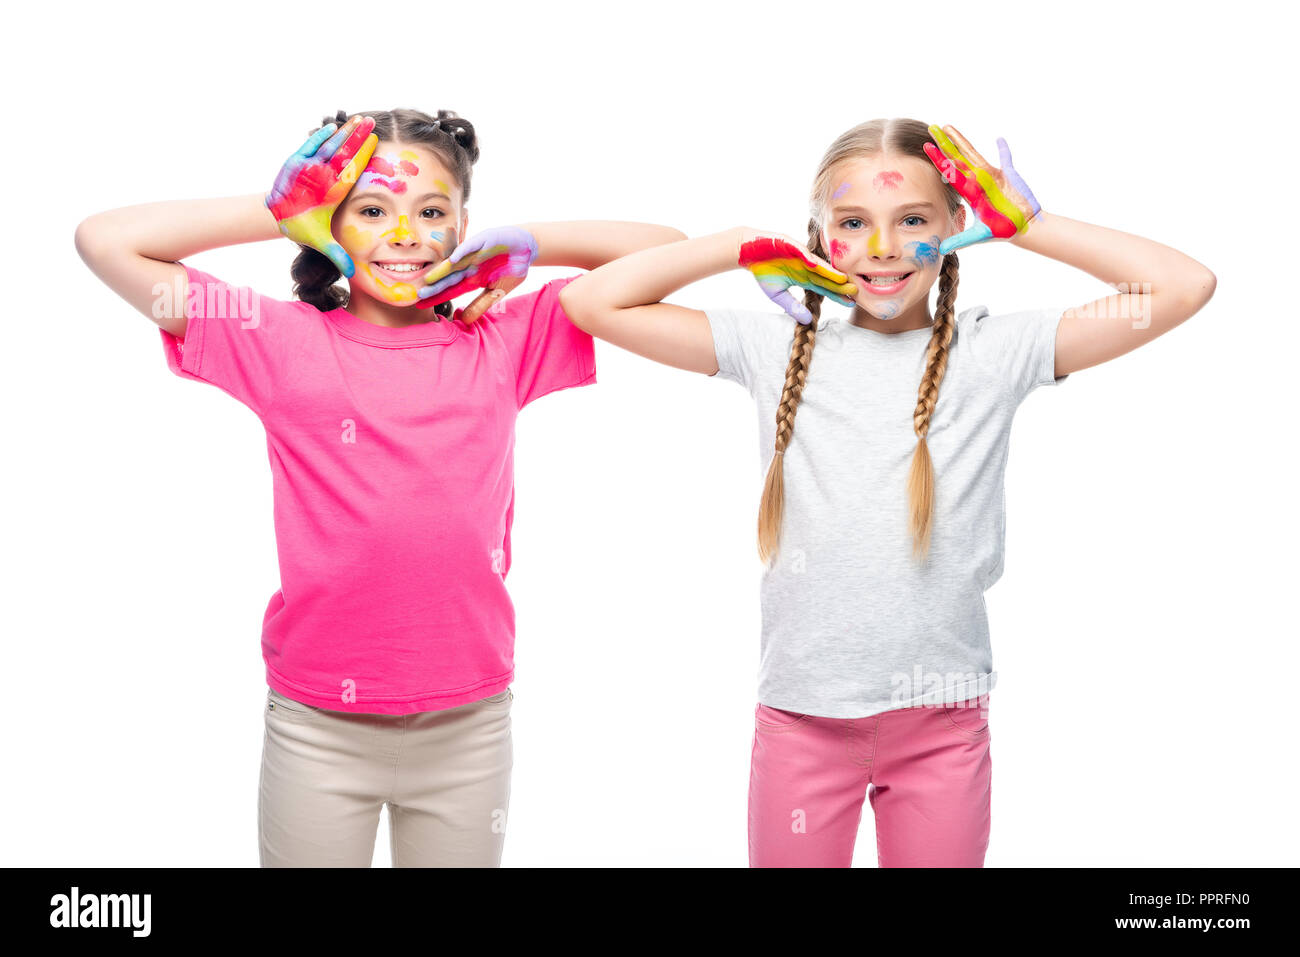 schoolchildren touching faces with painted hands isolated on white Stock Photo